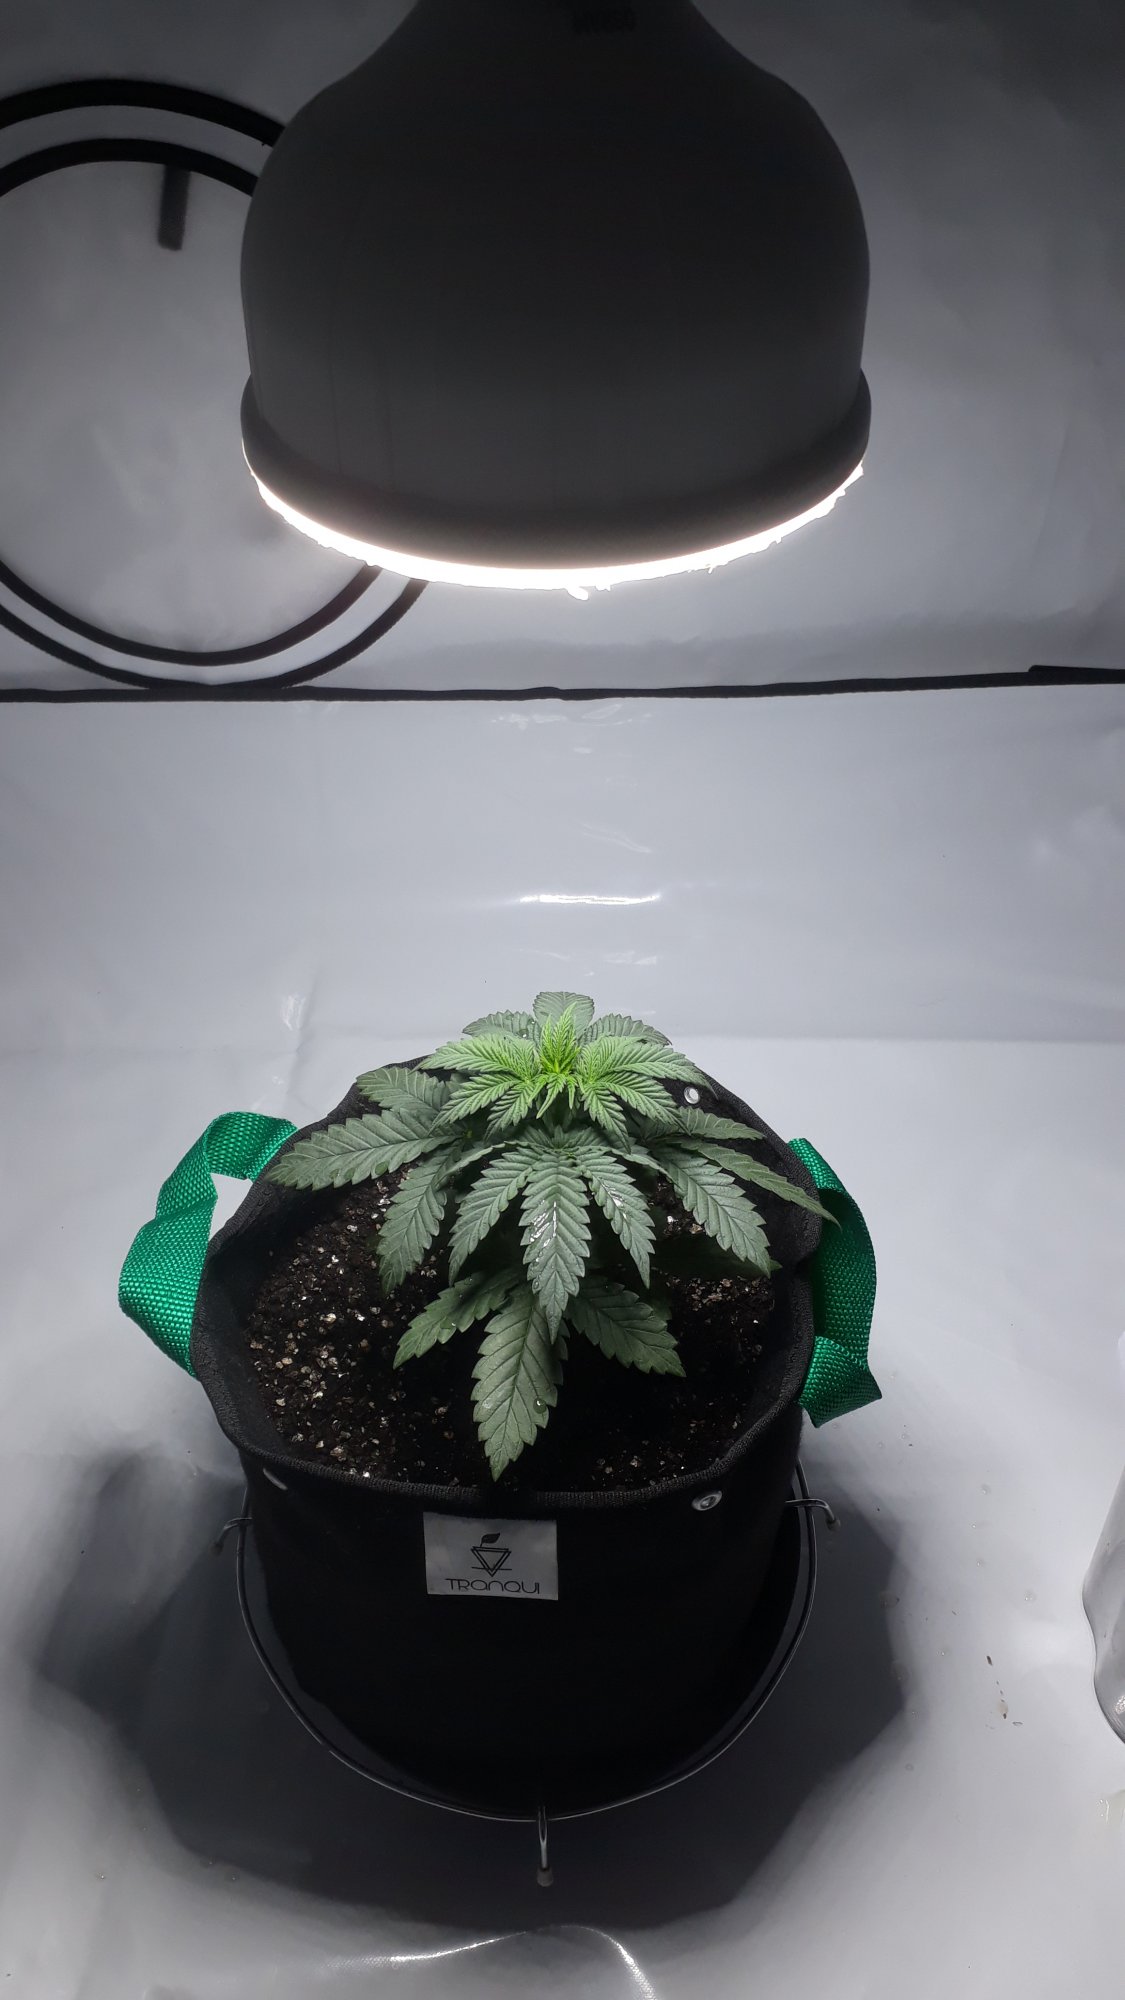 Help 1st time grower 1 month old plant small